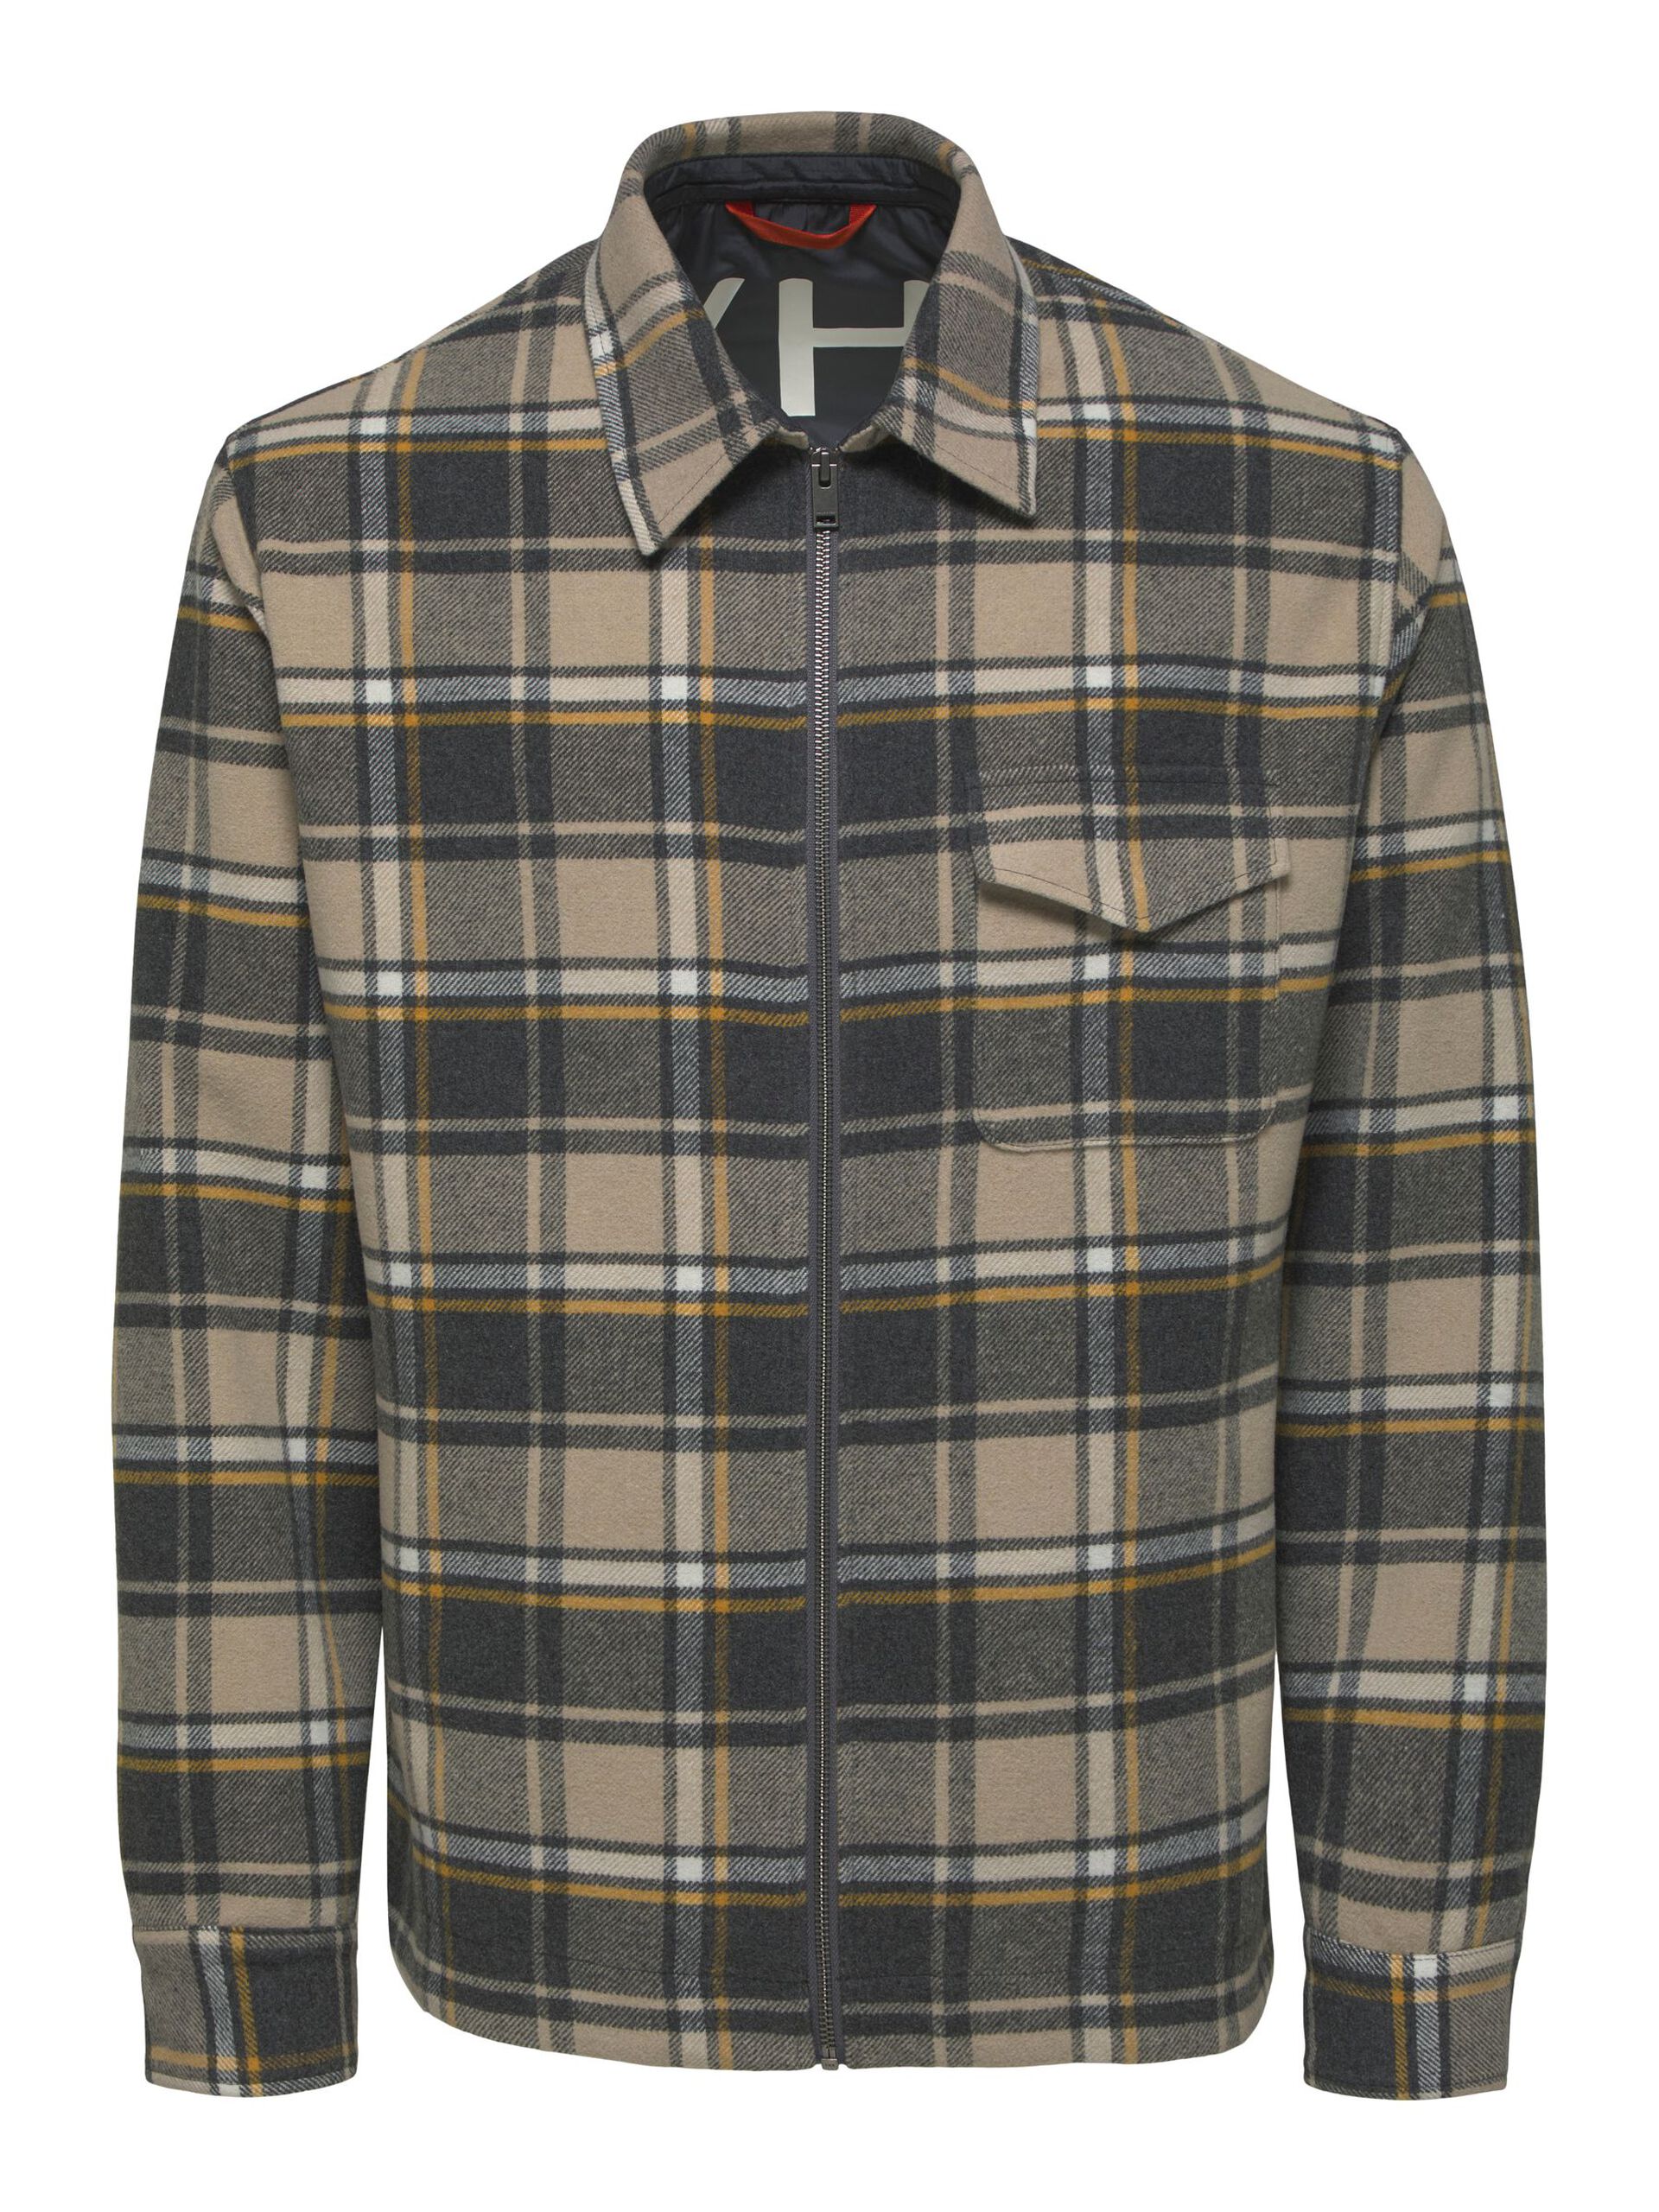 Selected Homme Arthur Check Jacket - Insence 